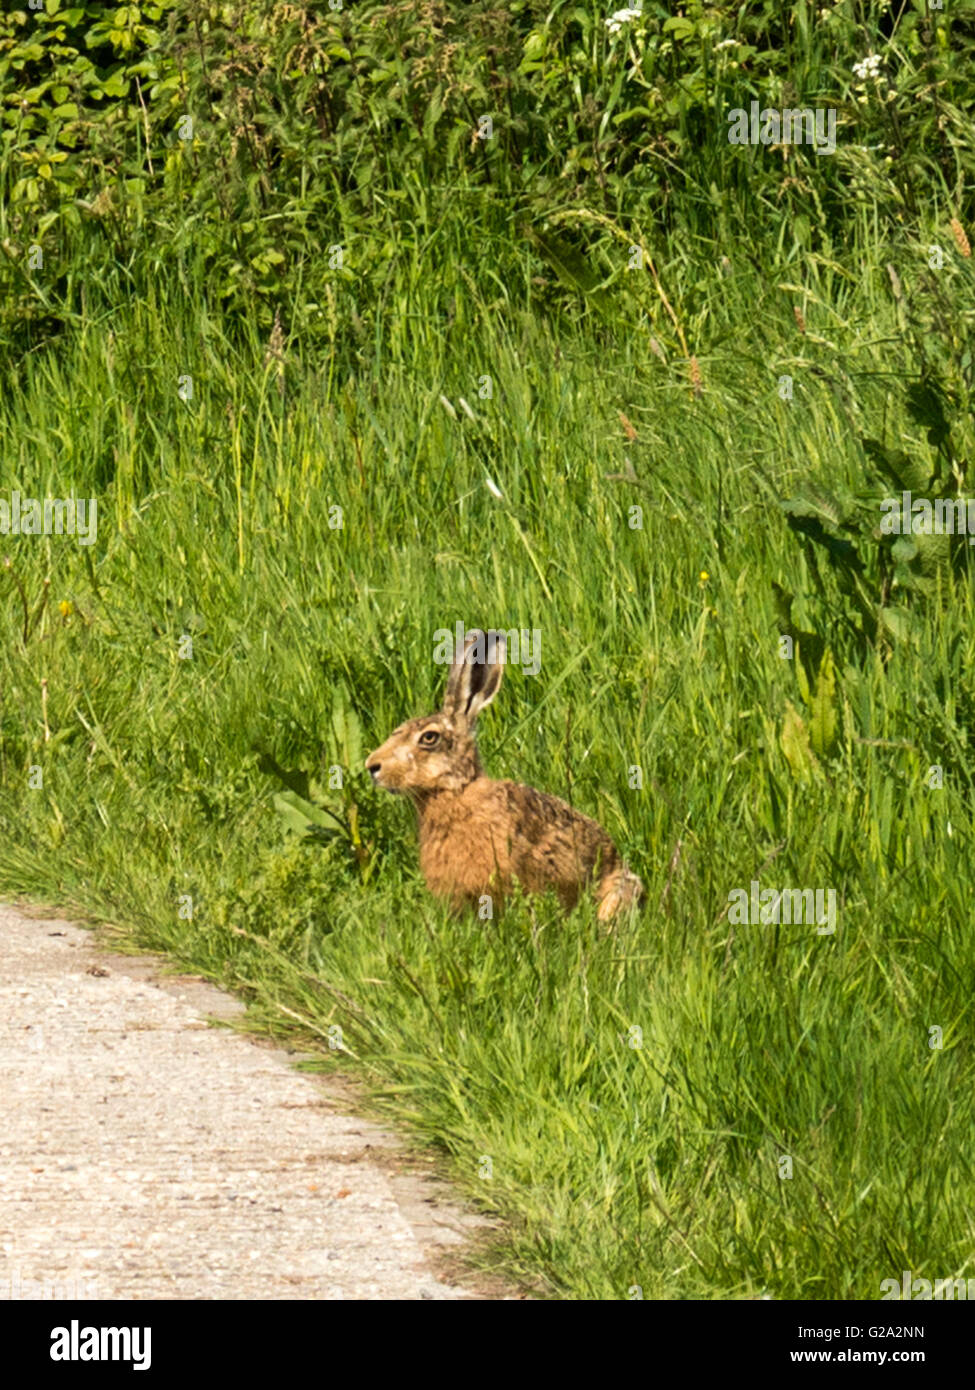 Wild Brown Hare (Lepus europaeus) depicted surveying its surroundings, isolated against green grass background. Stock Photo